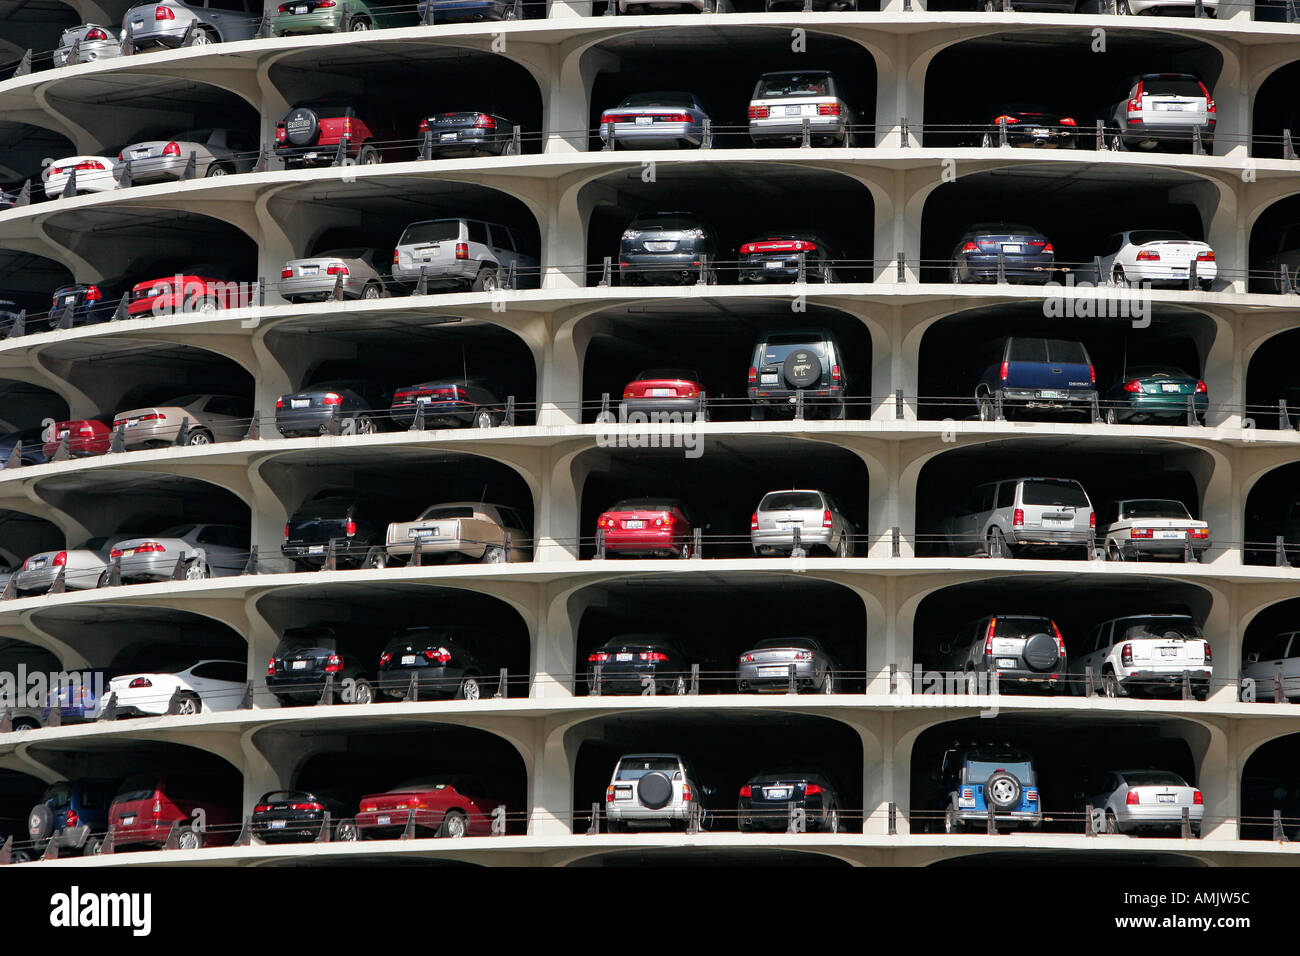 WATCH: Here's how cars are parked at Marina City 